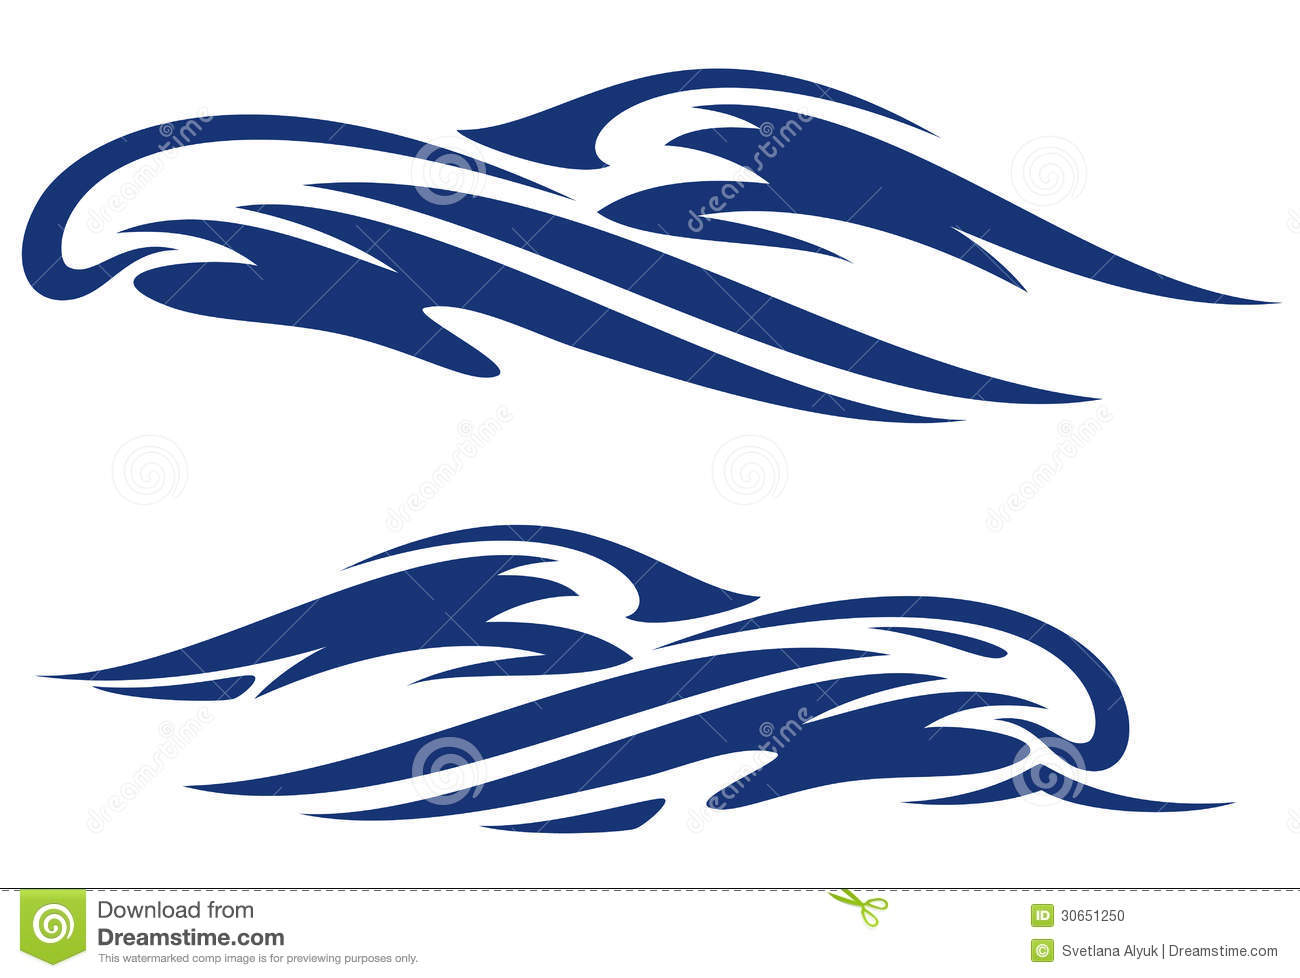 14 Simple Tribal Waves Vector Images